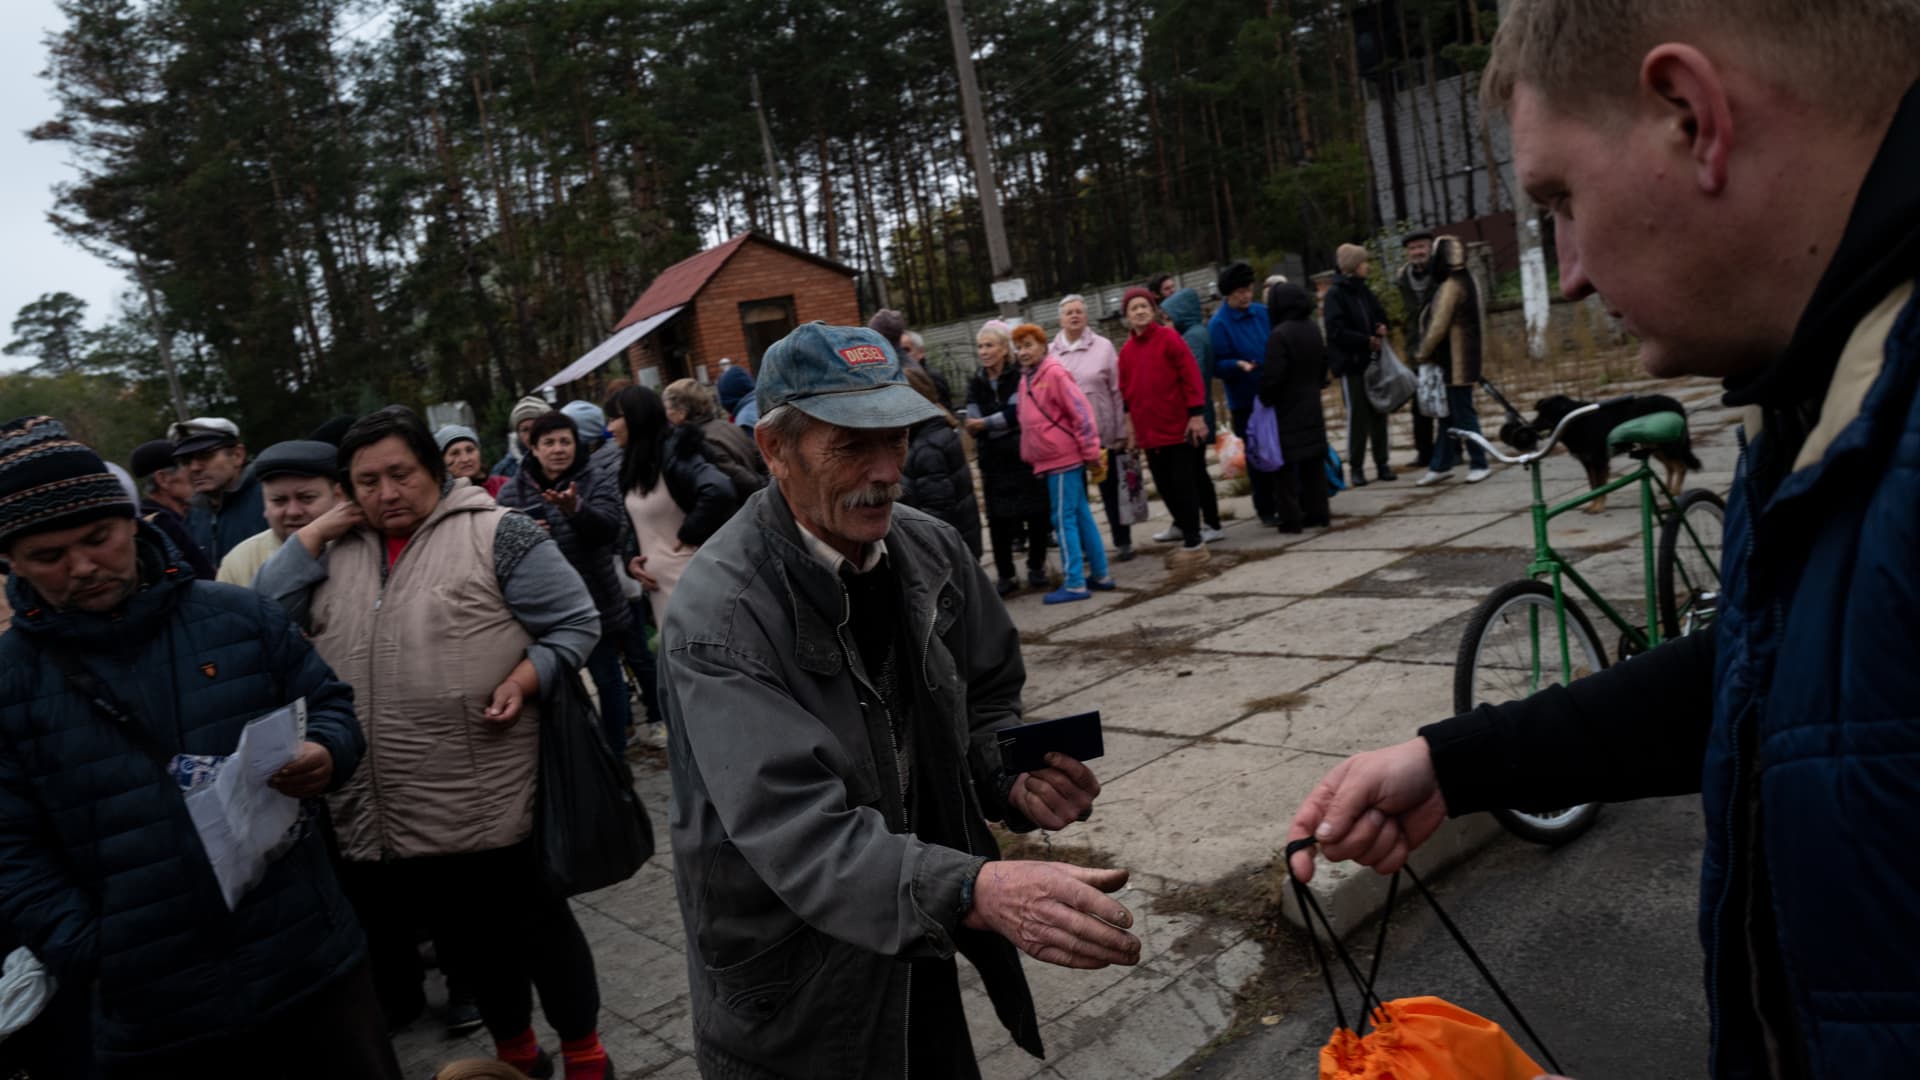 Ukrainian civilians queue for humanitarian aid provided by the Red Cross as people try to survive amid the wave of Russia's missile strikes in Sviatohiersk, Donetsk Oblast, Ukraine on October 20, 2022. 